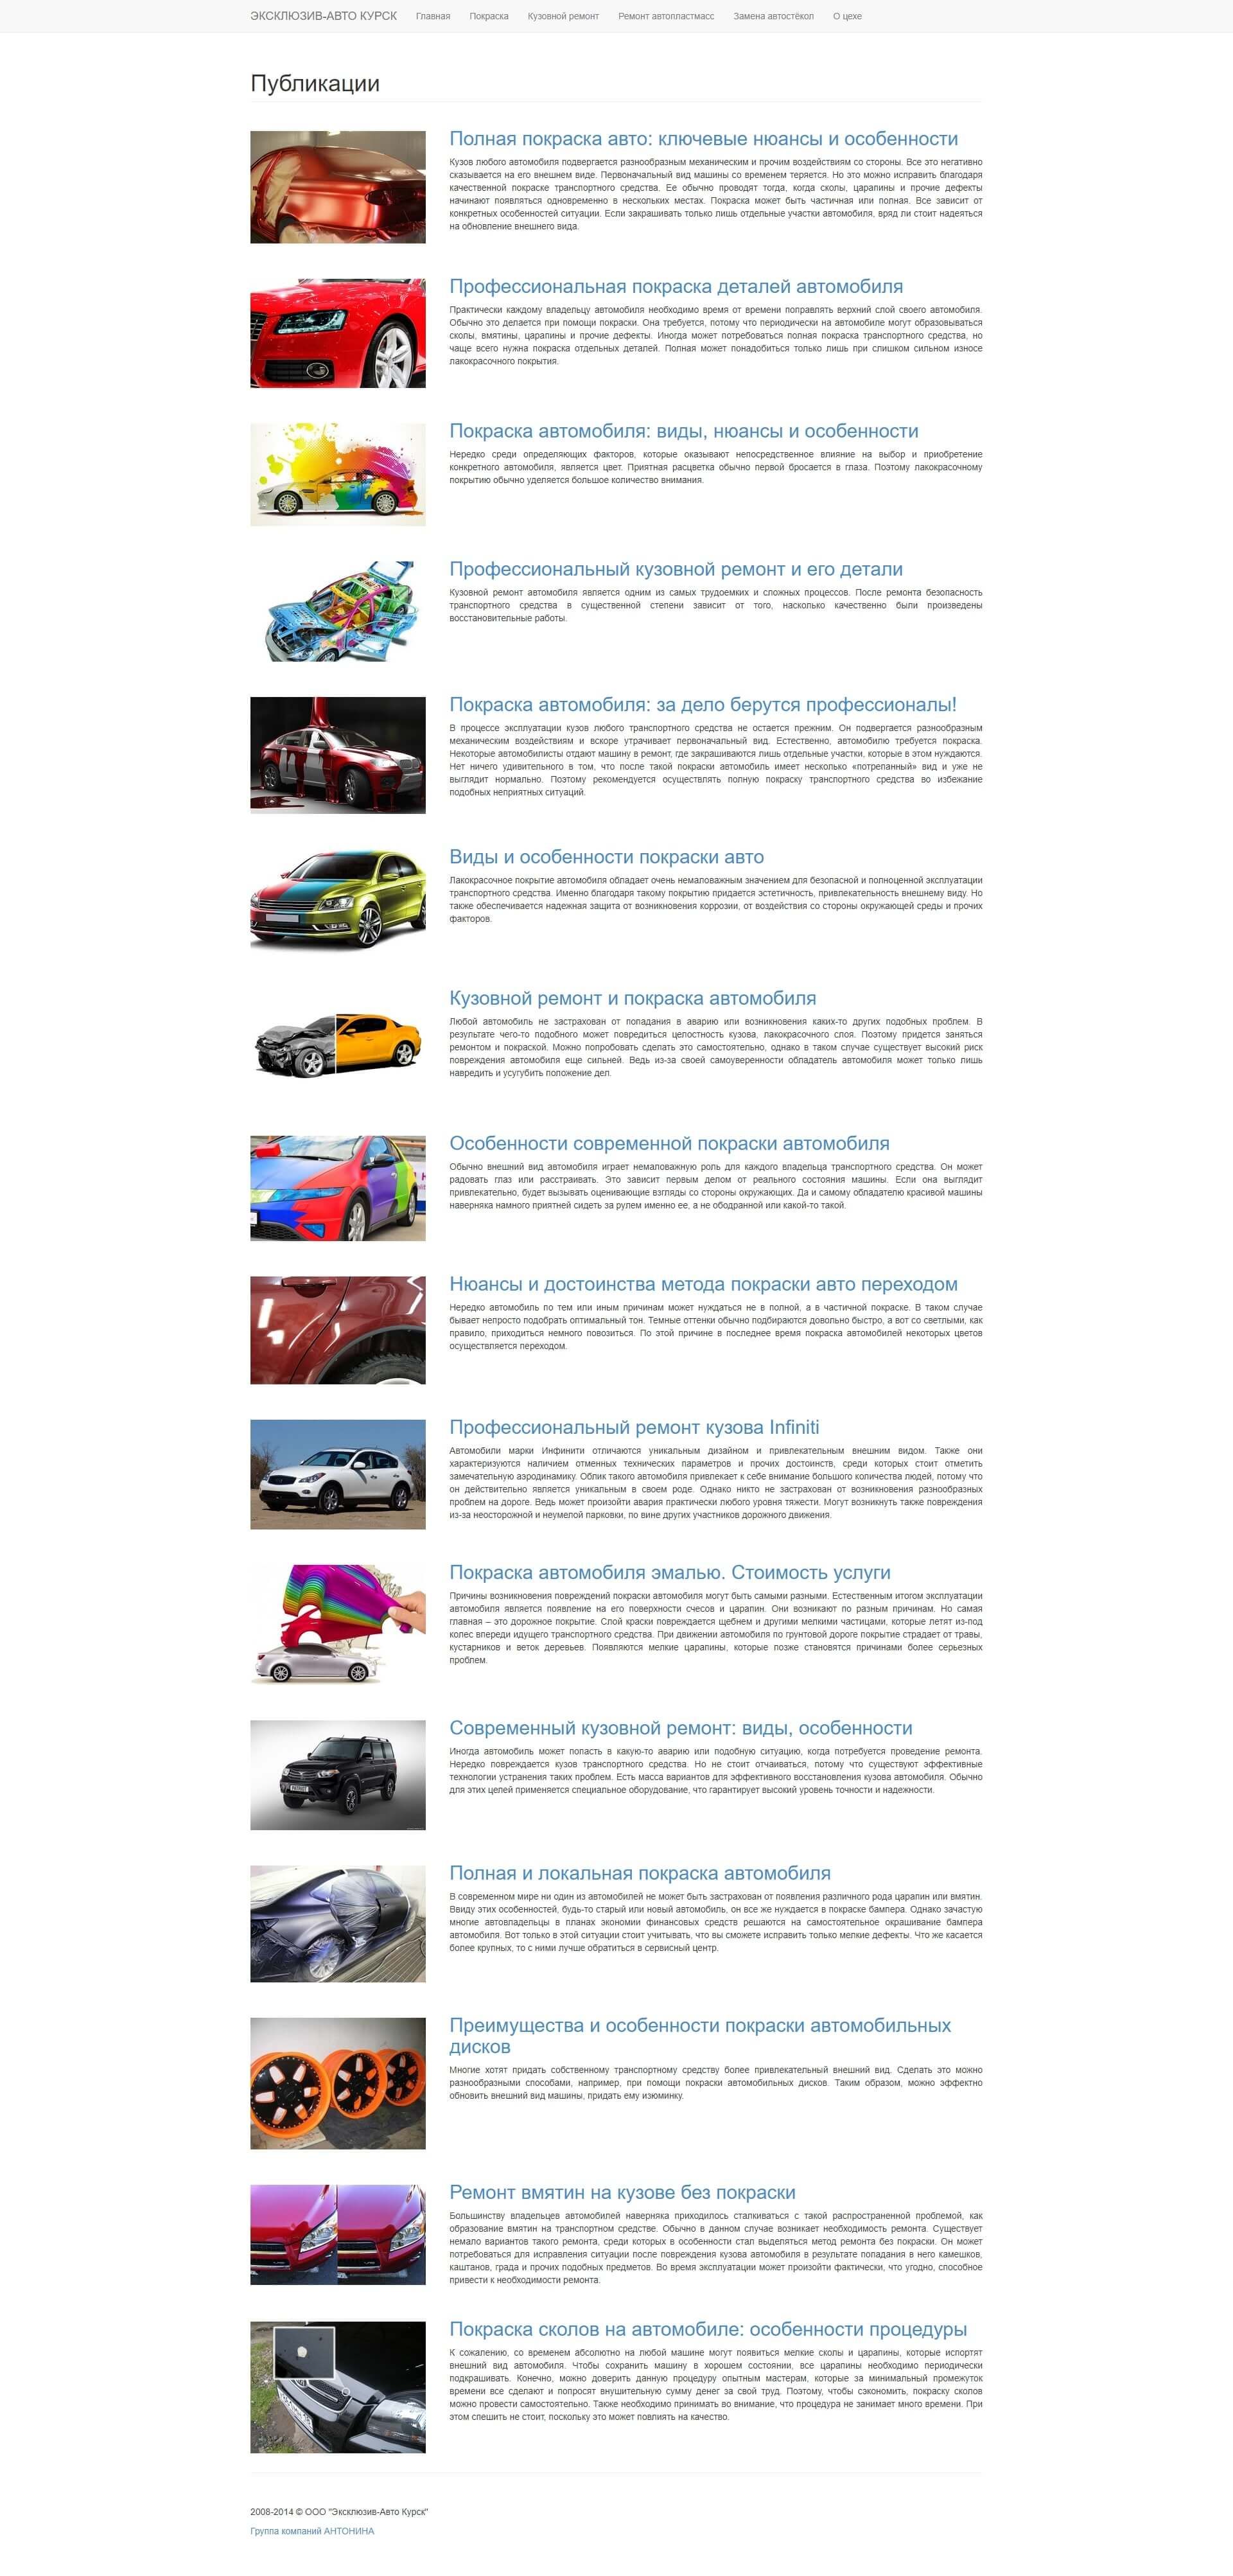 image of the desktop version of the site «Exclusive auto»